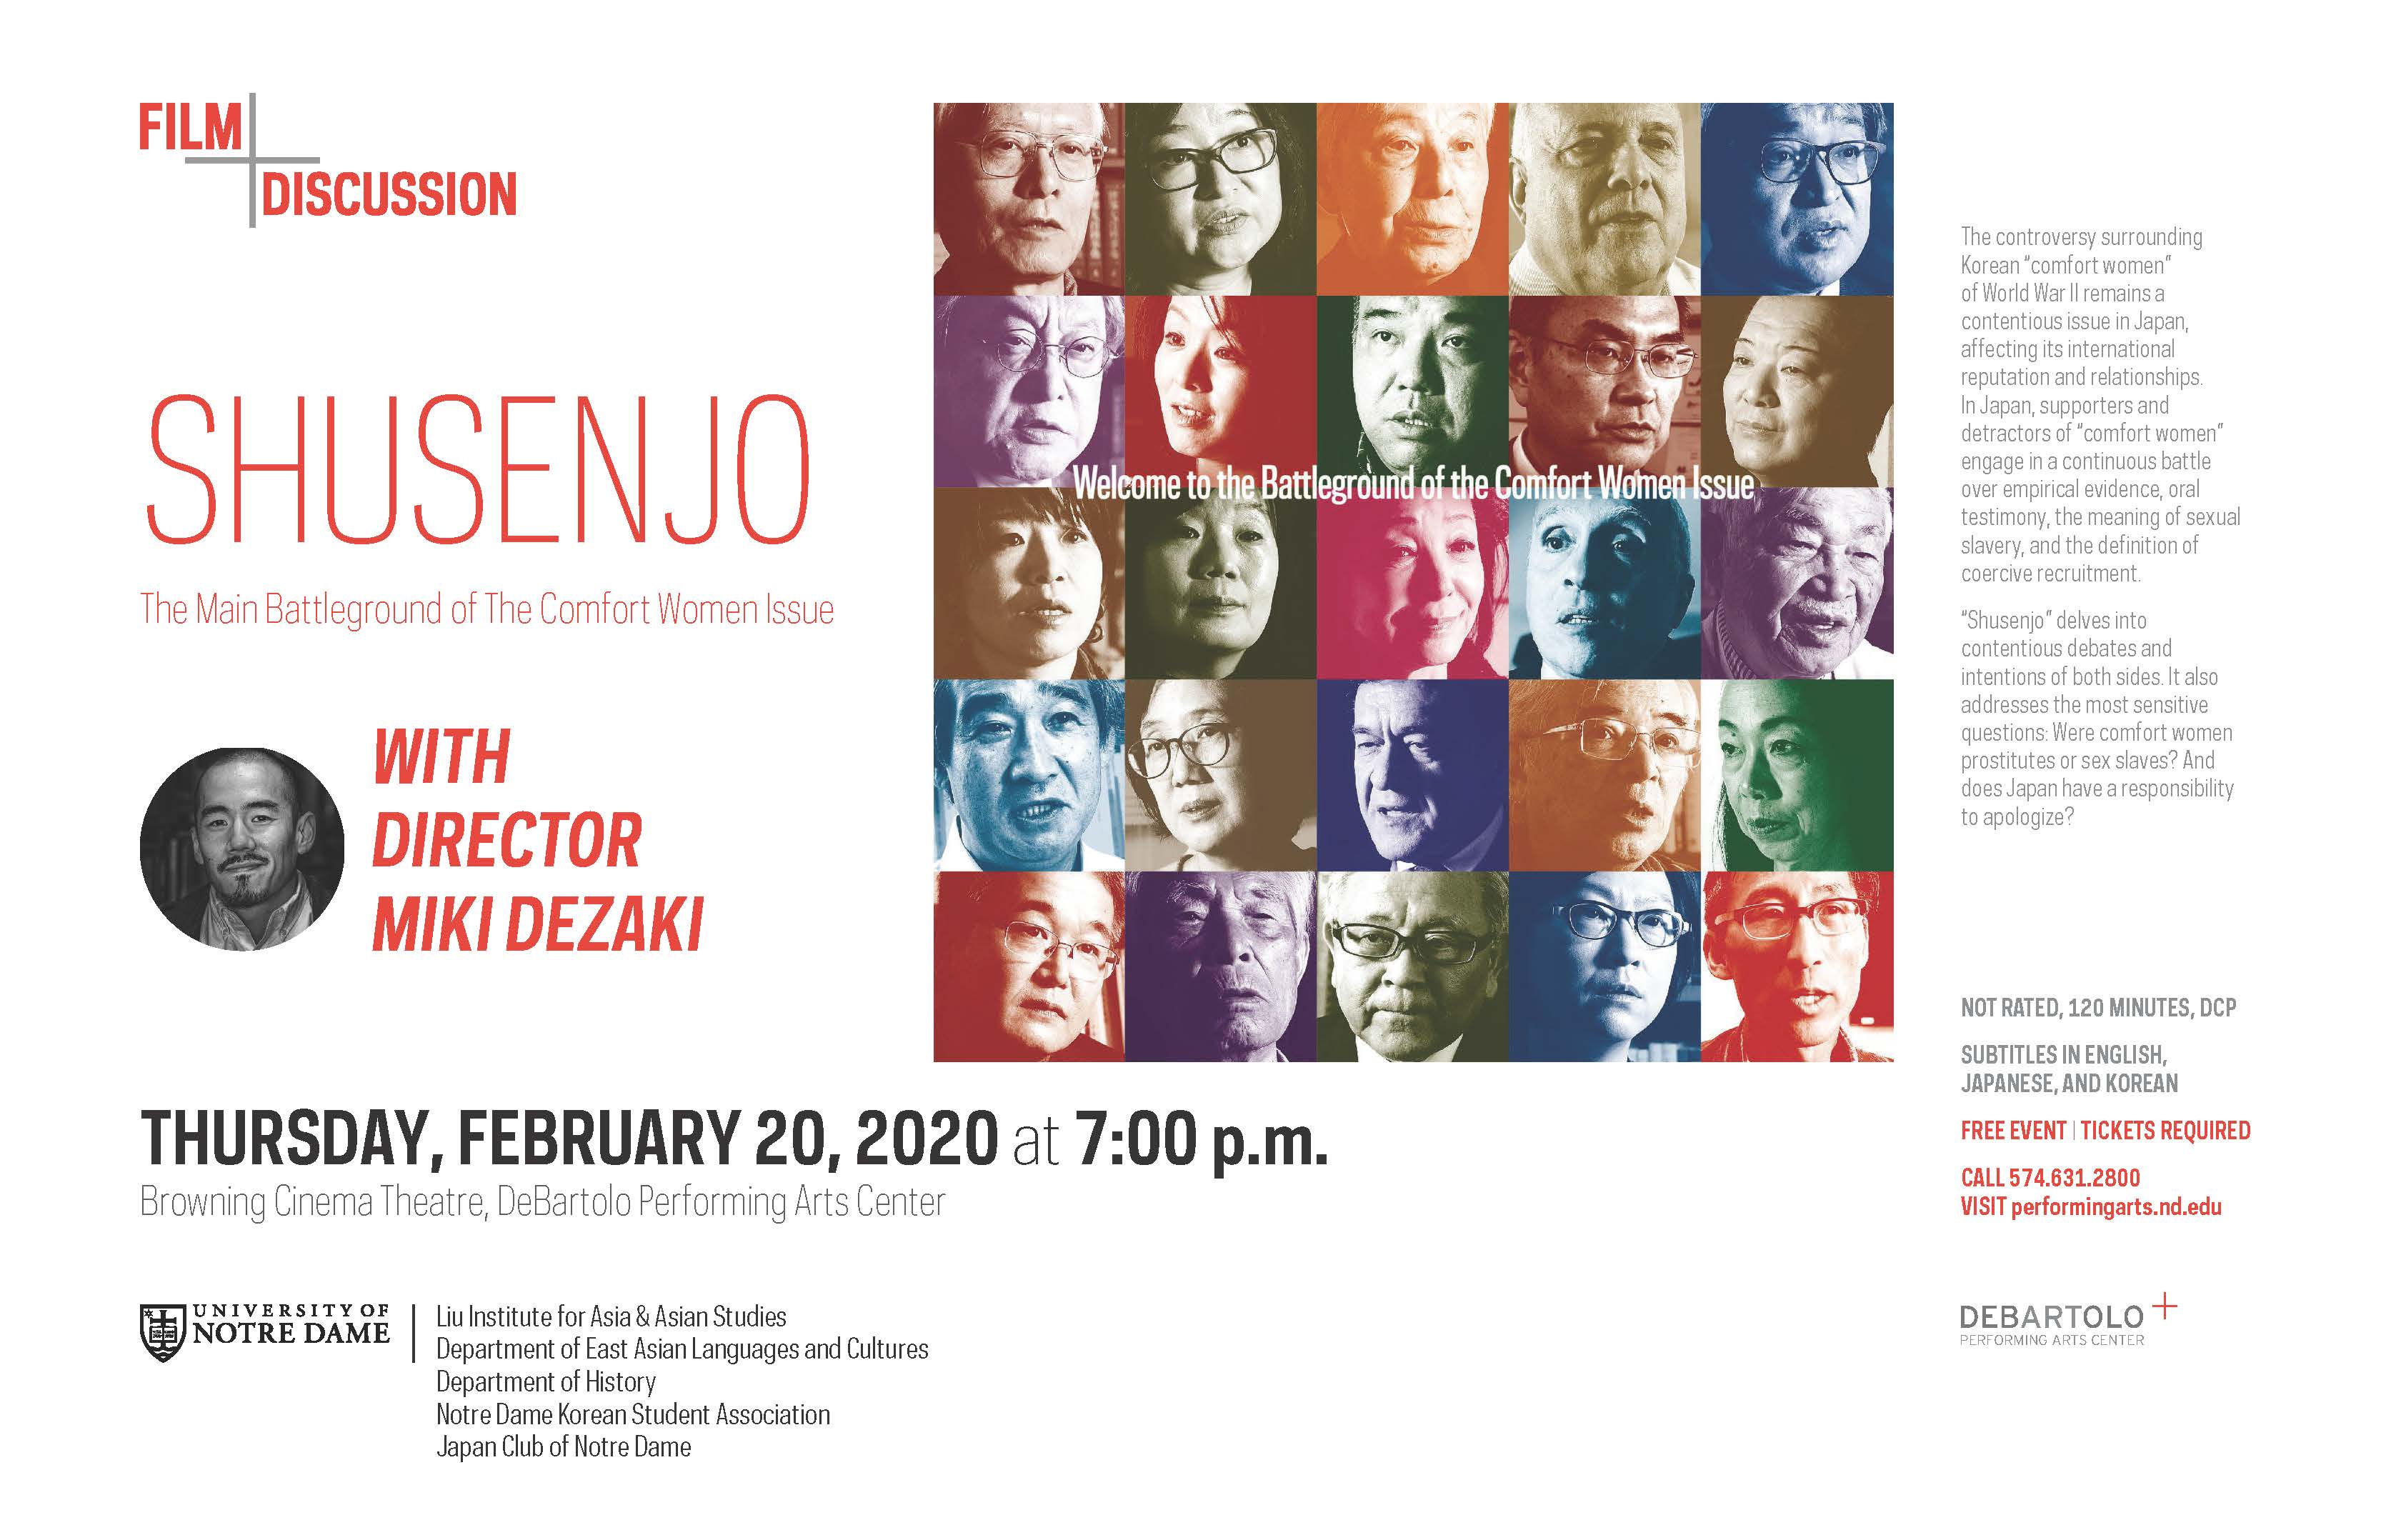 Film Screening Shusenjo The Main Battleground of the Comfort Women Issue (2019) Events News and Events About East Asian Languages and Cultures University of Notre Dame image pic